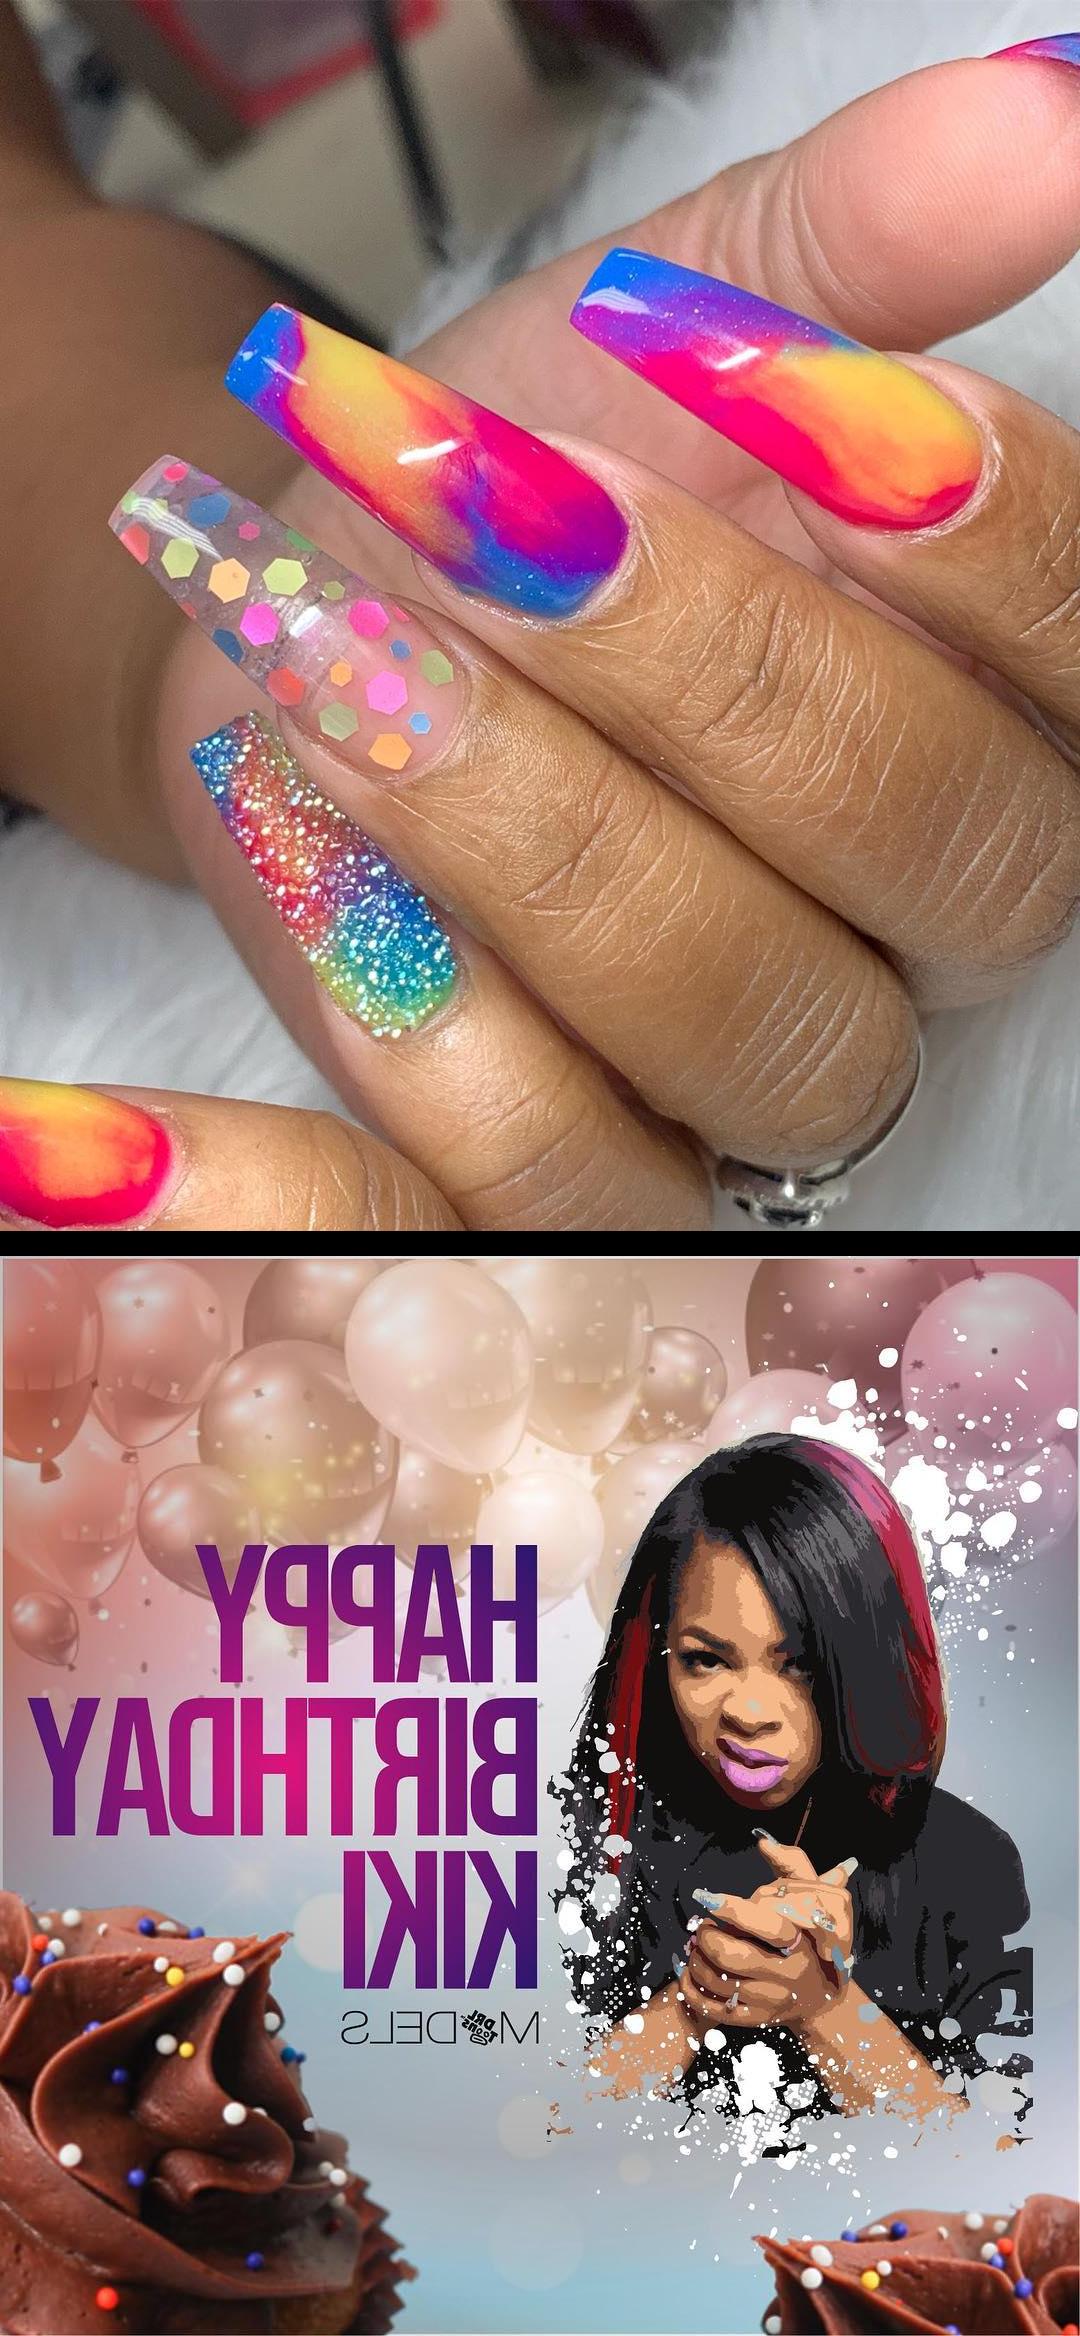 a nails,mimi nails,I doneven have the words to describe this perfection lol  Acrylics used ; tammytaylornails notpolish_nail  Glitter From dulcenailsprinkles  Use my code for 10% off your next order over $20!! (including Swarovski)  Swarovski; dreamtimecreations , nopolish , allacrylic , kreationsbykiki , nails , ncnails , raleighnails , durhamnails , glitter , glitternails , tumblr , nailsofinstagram , nailsoftheday , nailpro , fashion , nailart , nailtutorial , bgdn , blackgirlsdonails , blacknailtechs , naillife , nailsmagazine , tumblrfeature , dulcenailsprinkles , kreationsbykiki takes 29! Thank you drltoons for the visual! Happy birthday to me !! 